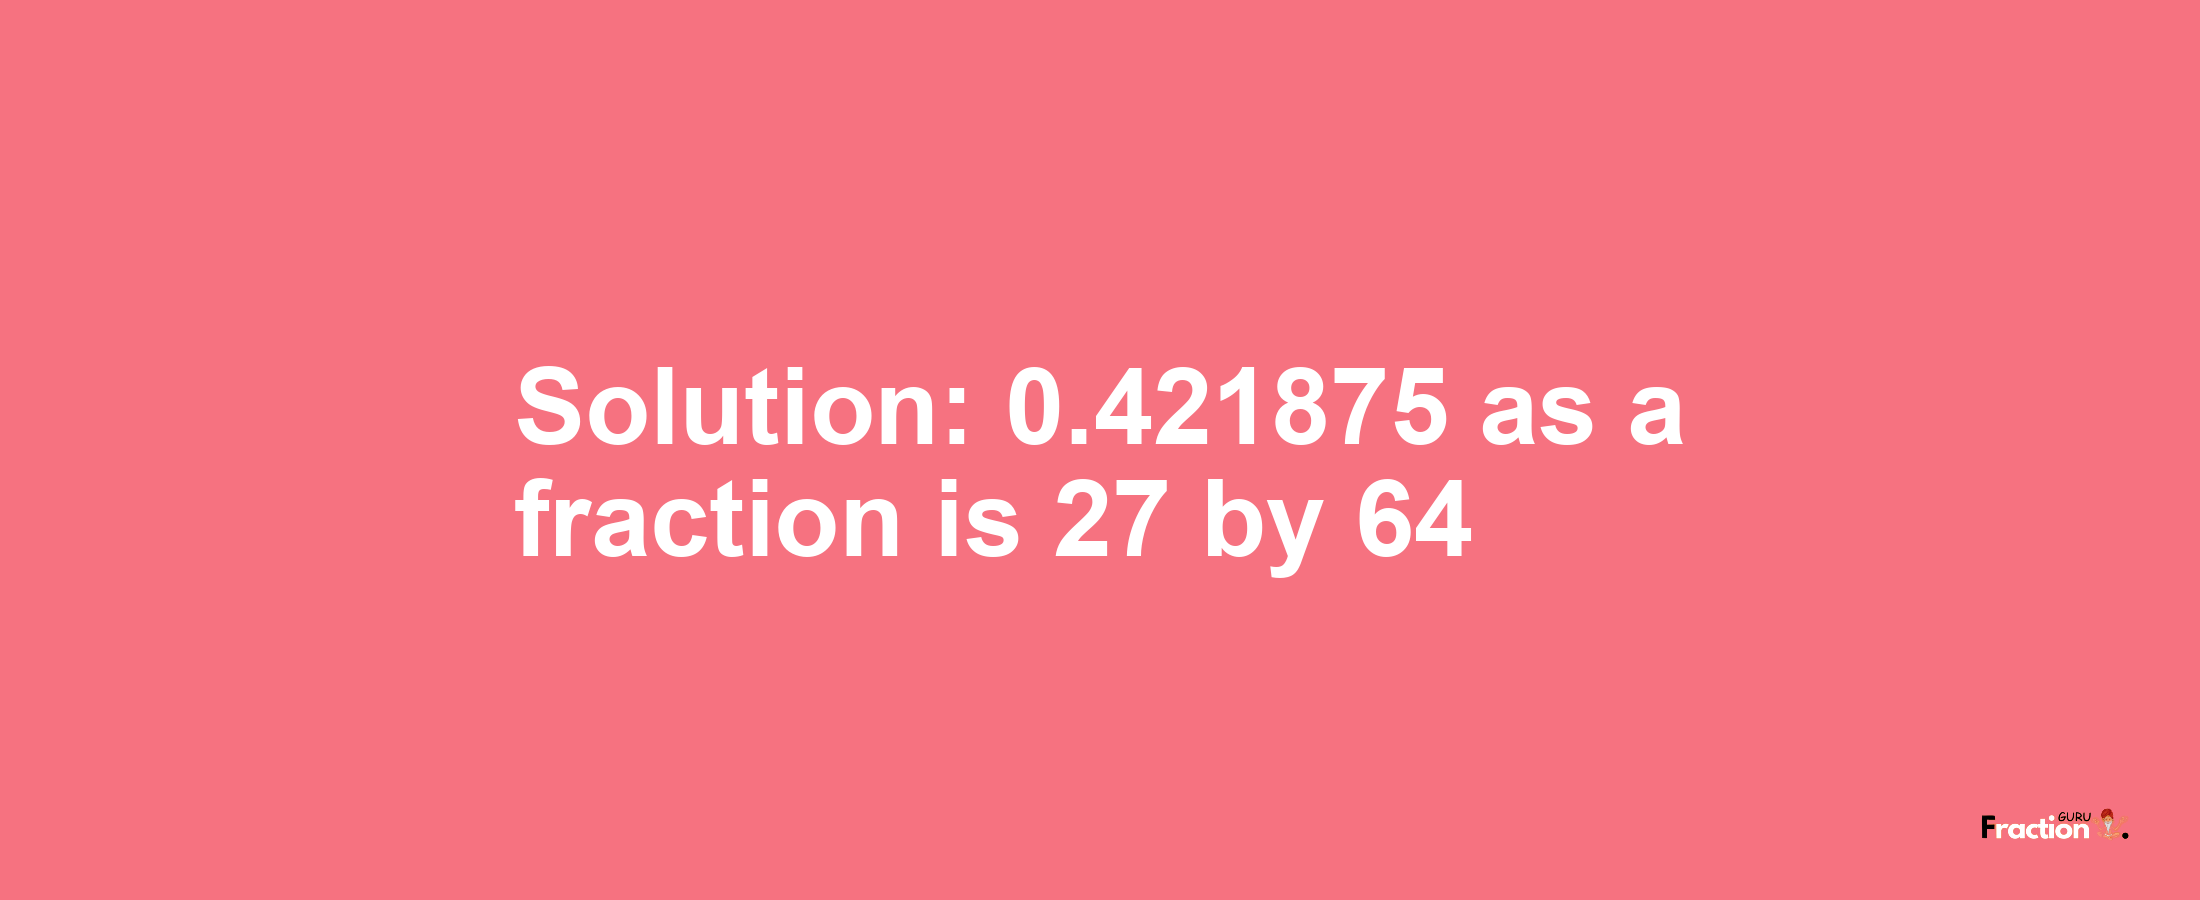 Solution:0.421875 as a fraction is 27/64